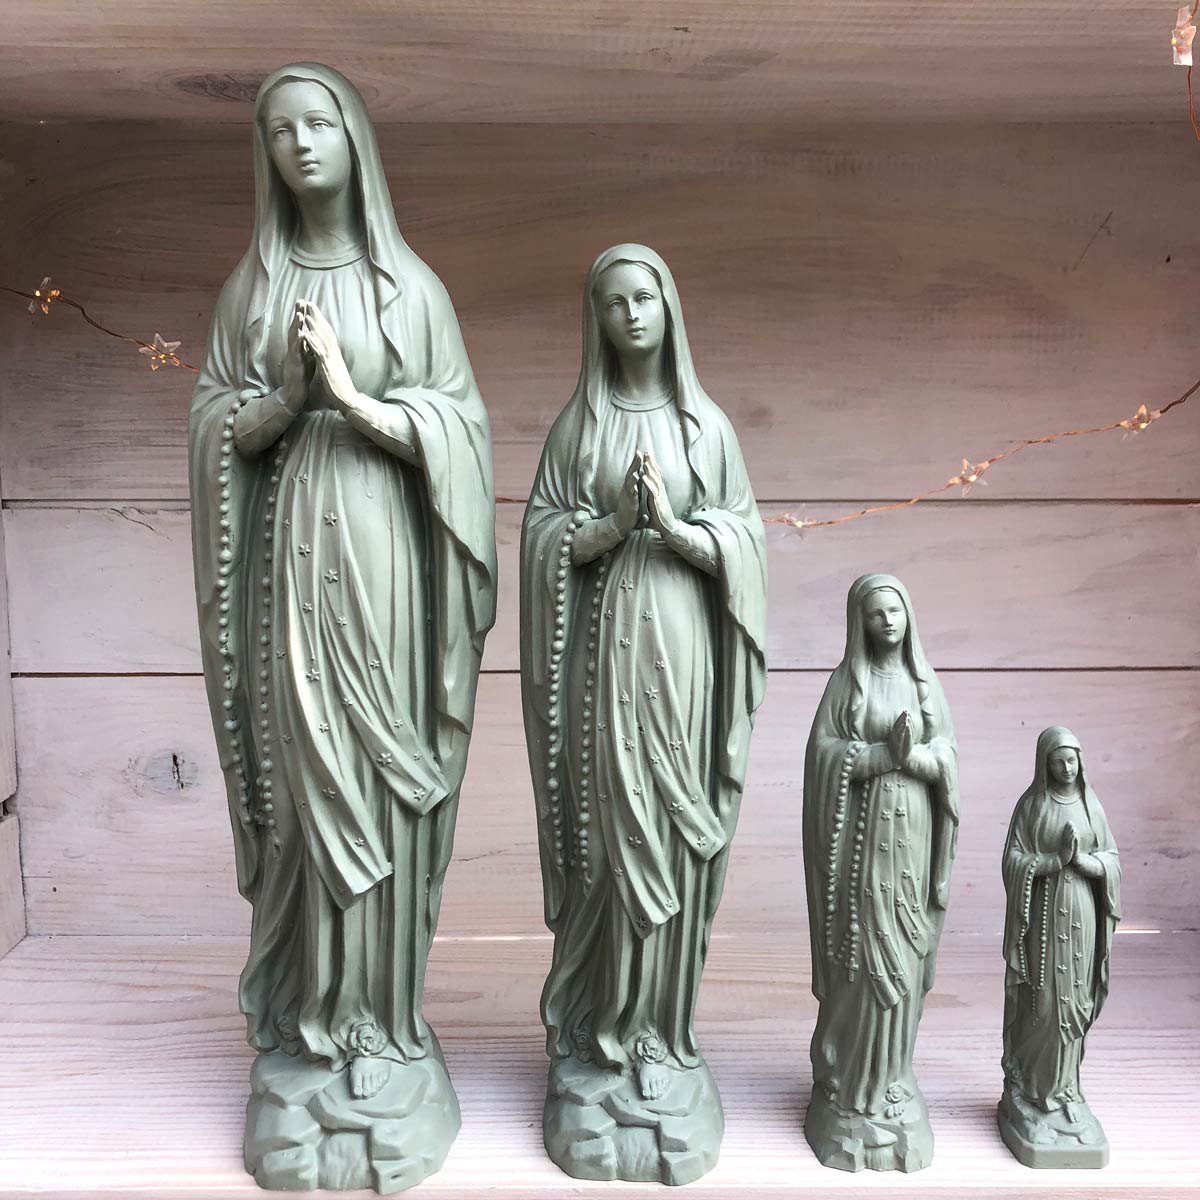 Our Lady of Lourdes Statues